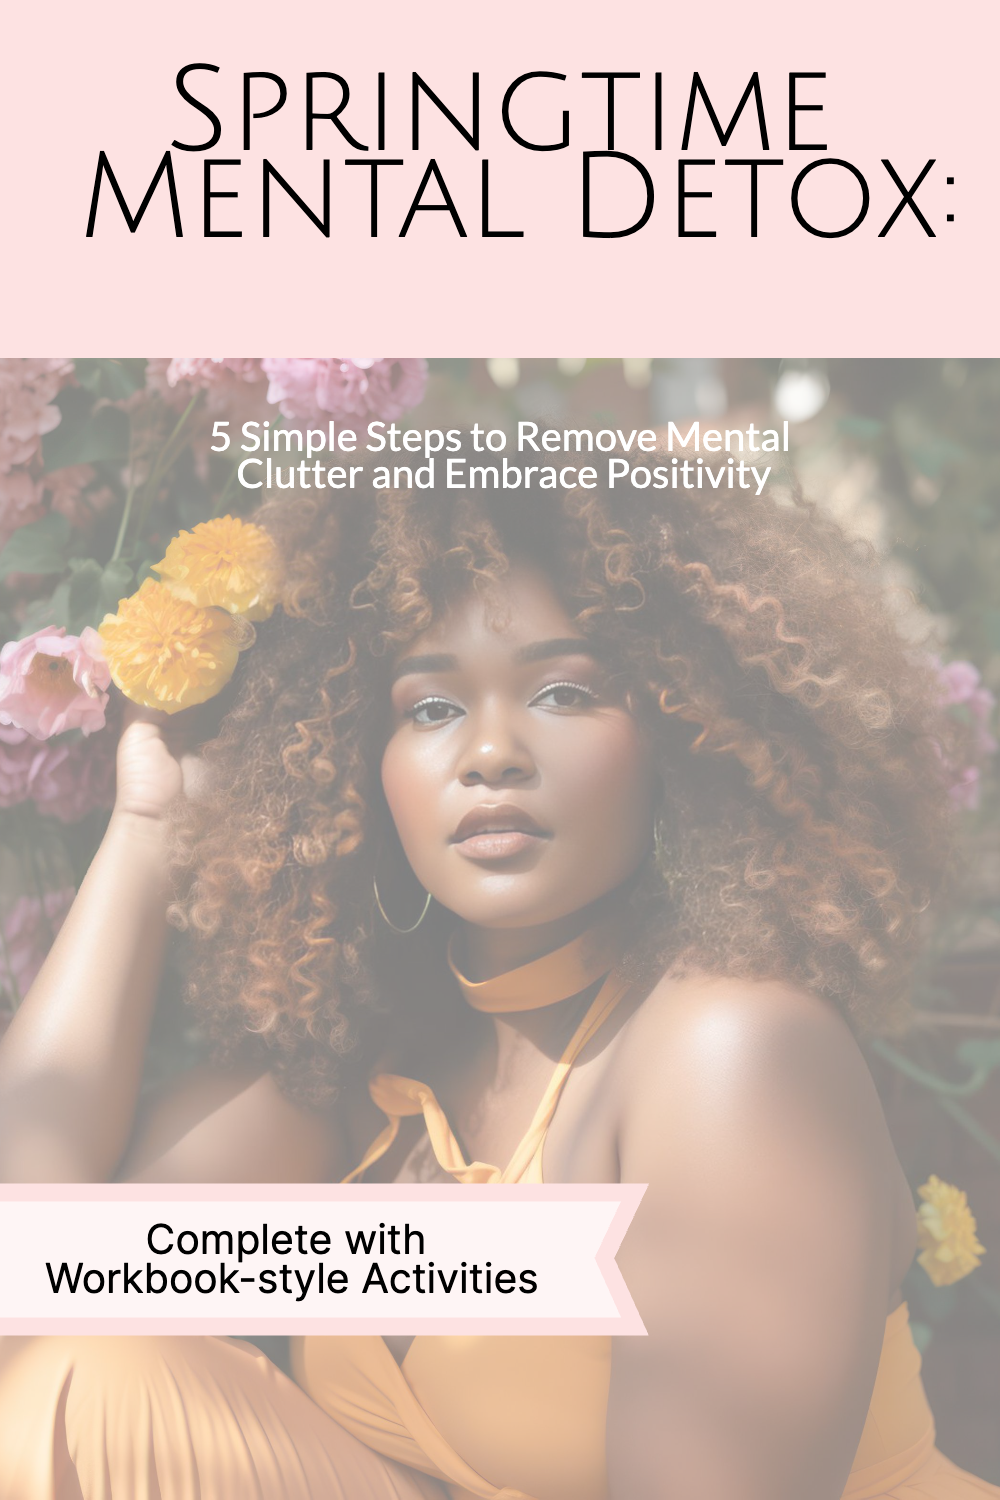 Springtime Mental Detox: 5 Simple Steps to Remove Mental Clutter and Embrace Positivity